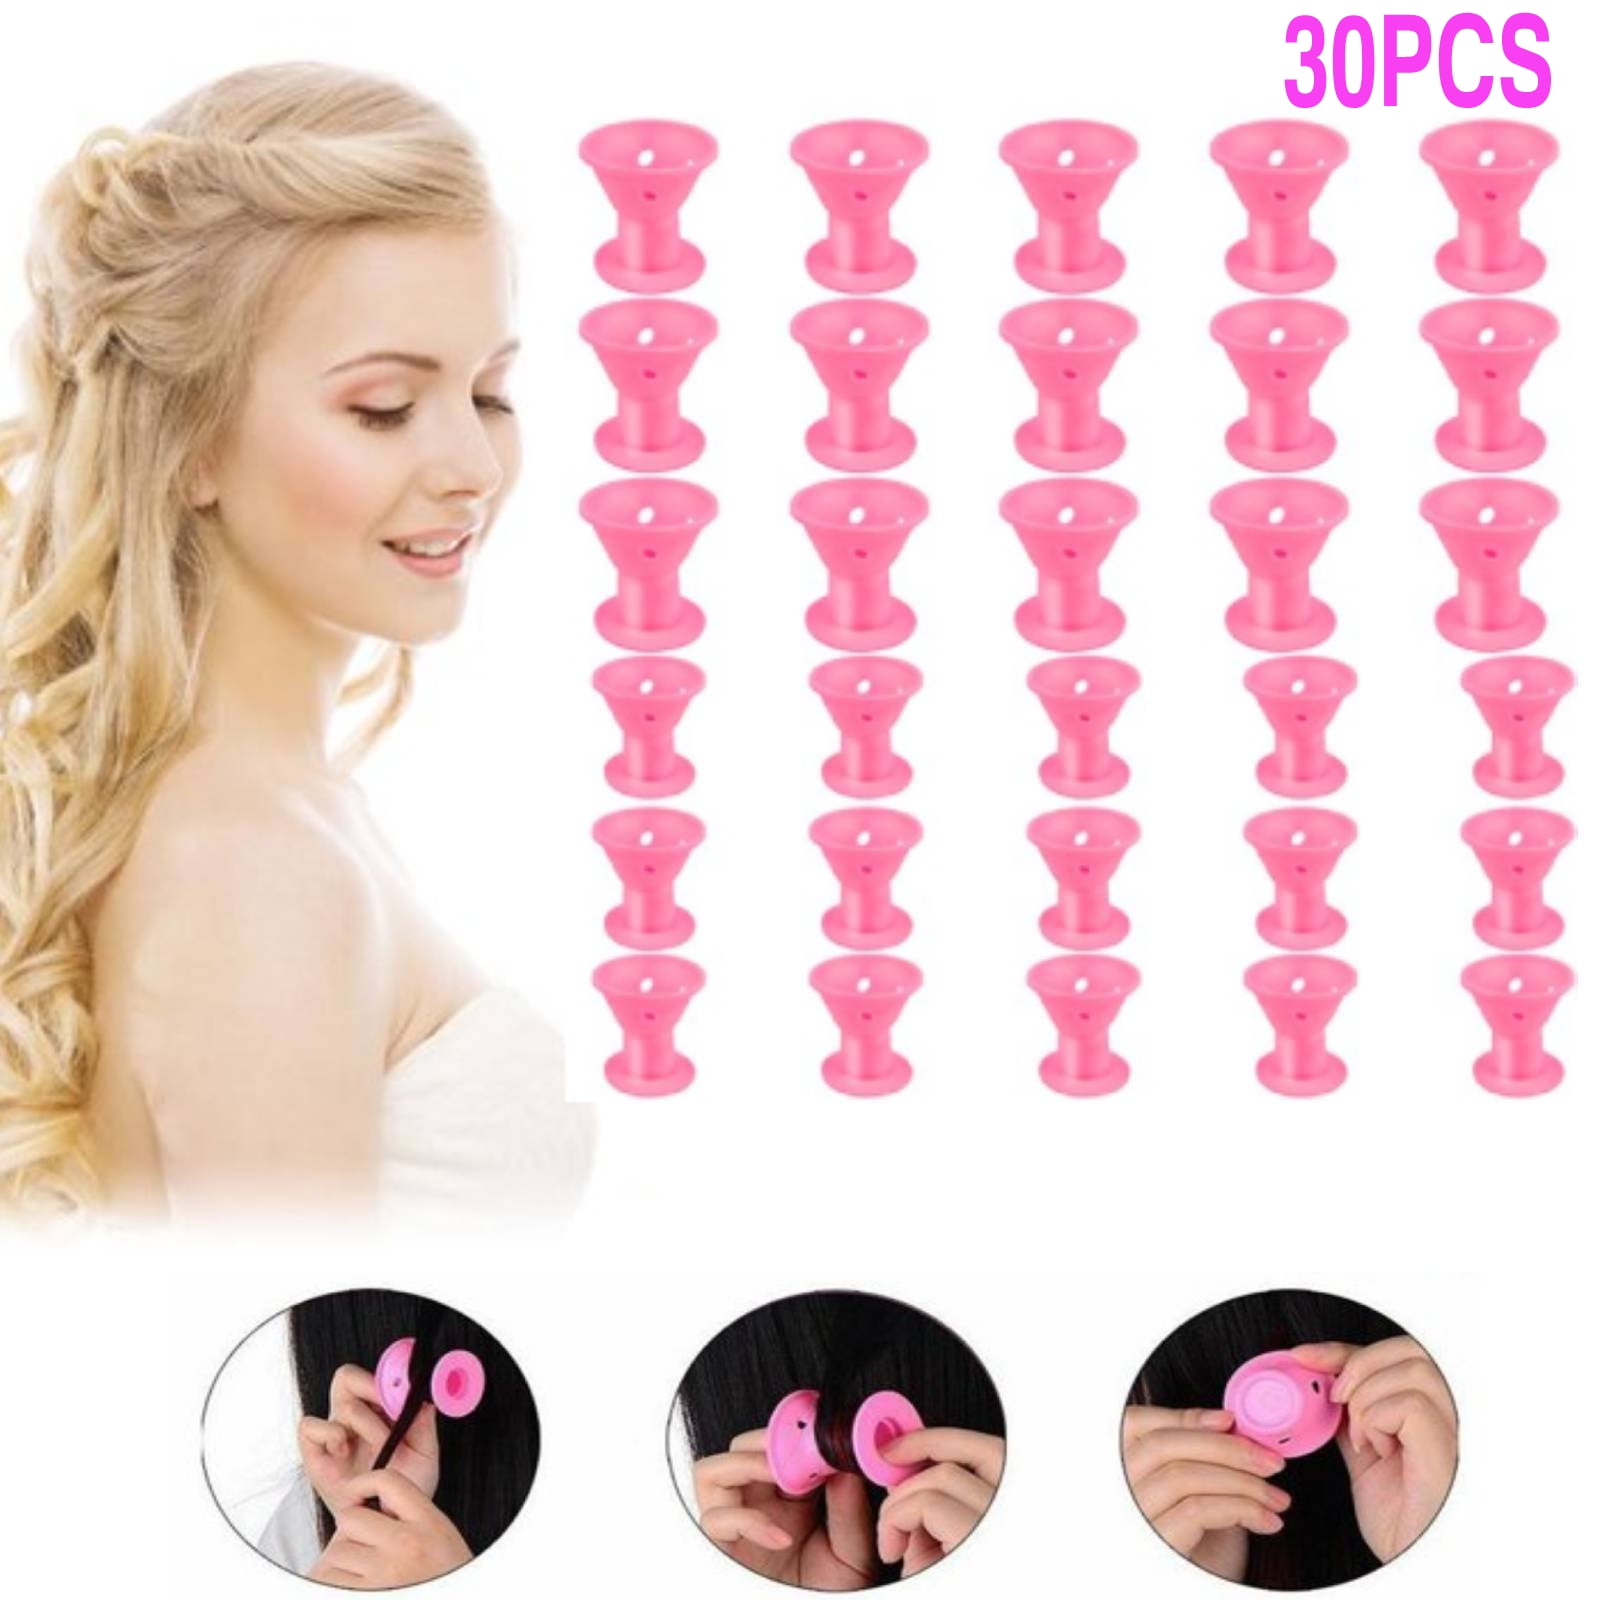 30pcs Magic Silicone Hair Curlers Rollers, EEEkit No Clip Hair Style Rollers  Soft Magic DIY Curling Hairstyle Tools Hair Accessories 